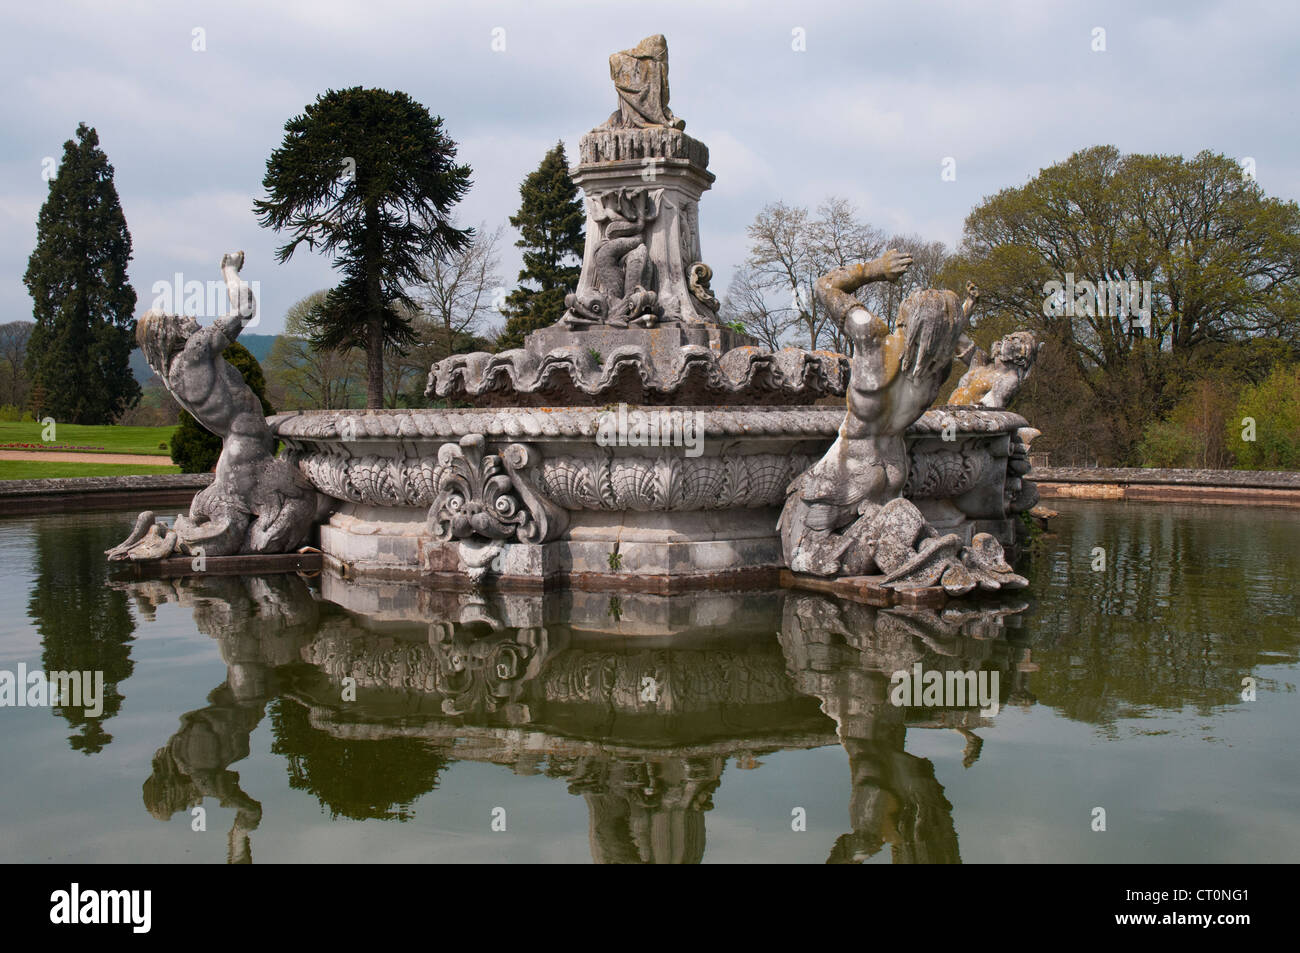 Fountain in the formal gardens of Witley Court, the remains of a once-great country house in Worcestershire, England Stock Photo